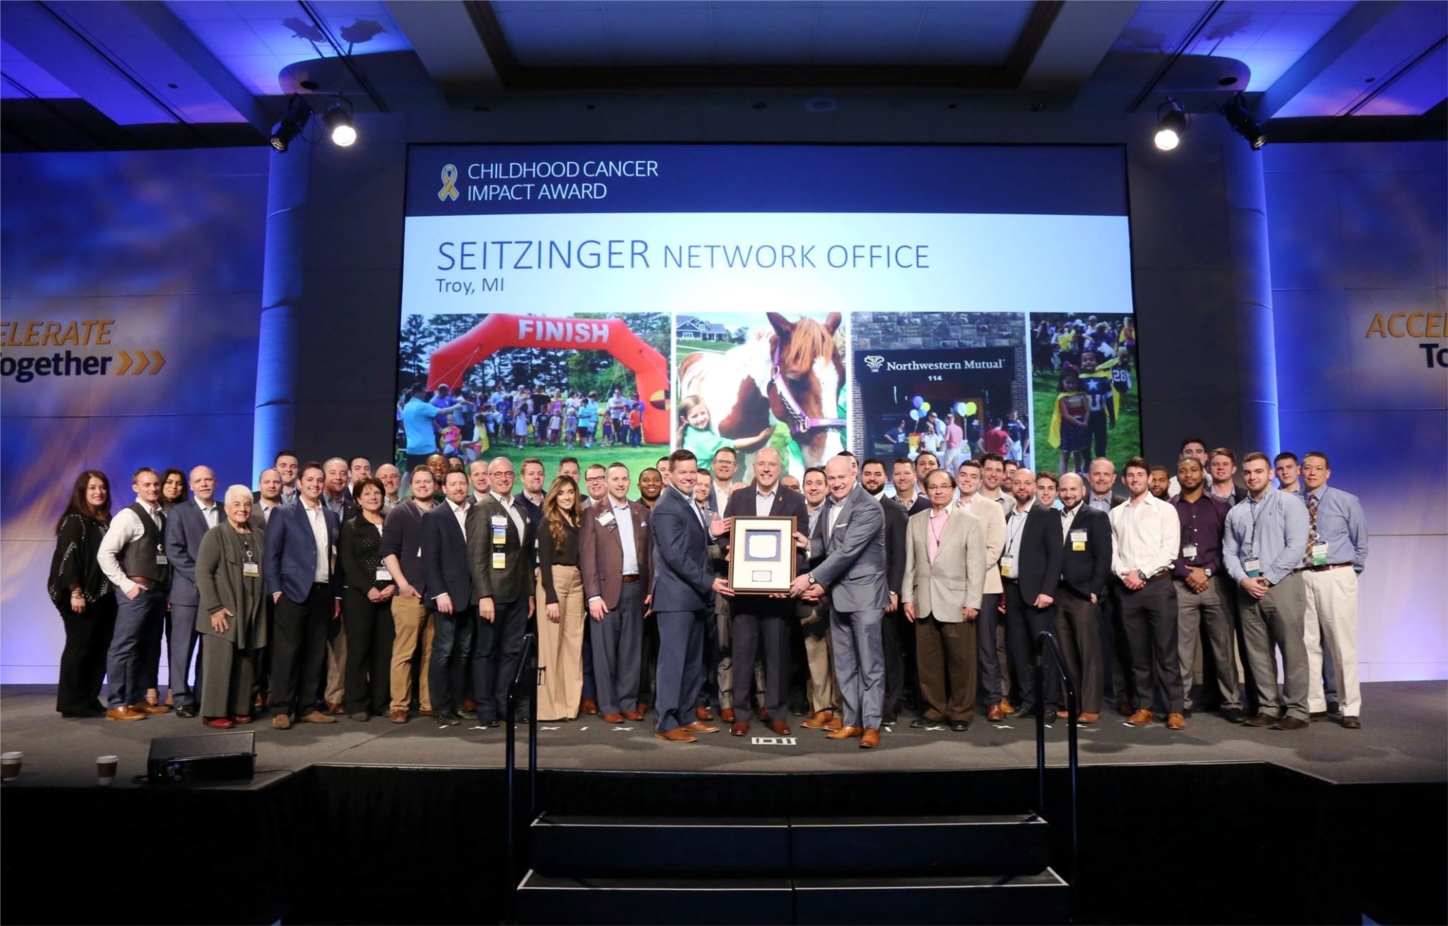 Through our concerted and continued dedication to Childhood Cancer Awareness, Northwestern Mutual - Troy was awarded the National Childhood Cancer Impact Award in 2018.